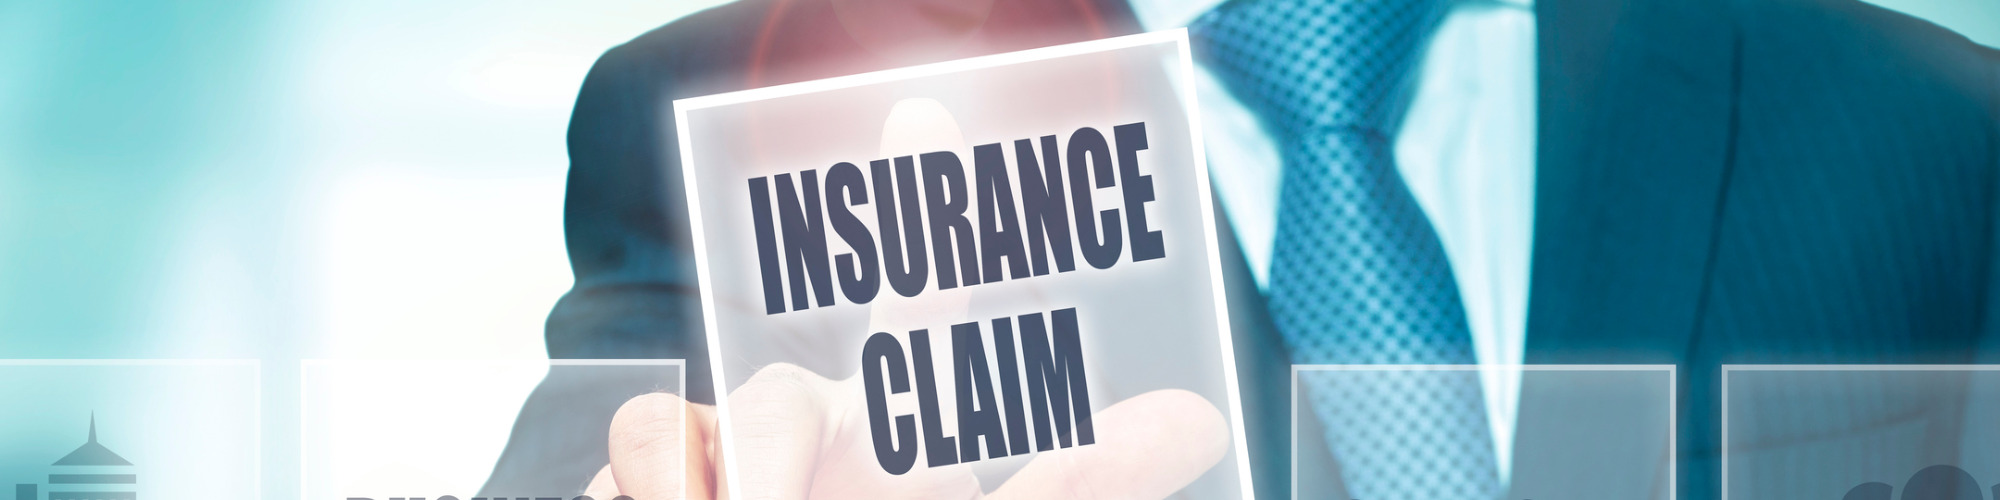 Employers Liability & Public Liability Insurance Claims - Challenges for Policyholders & Insurers